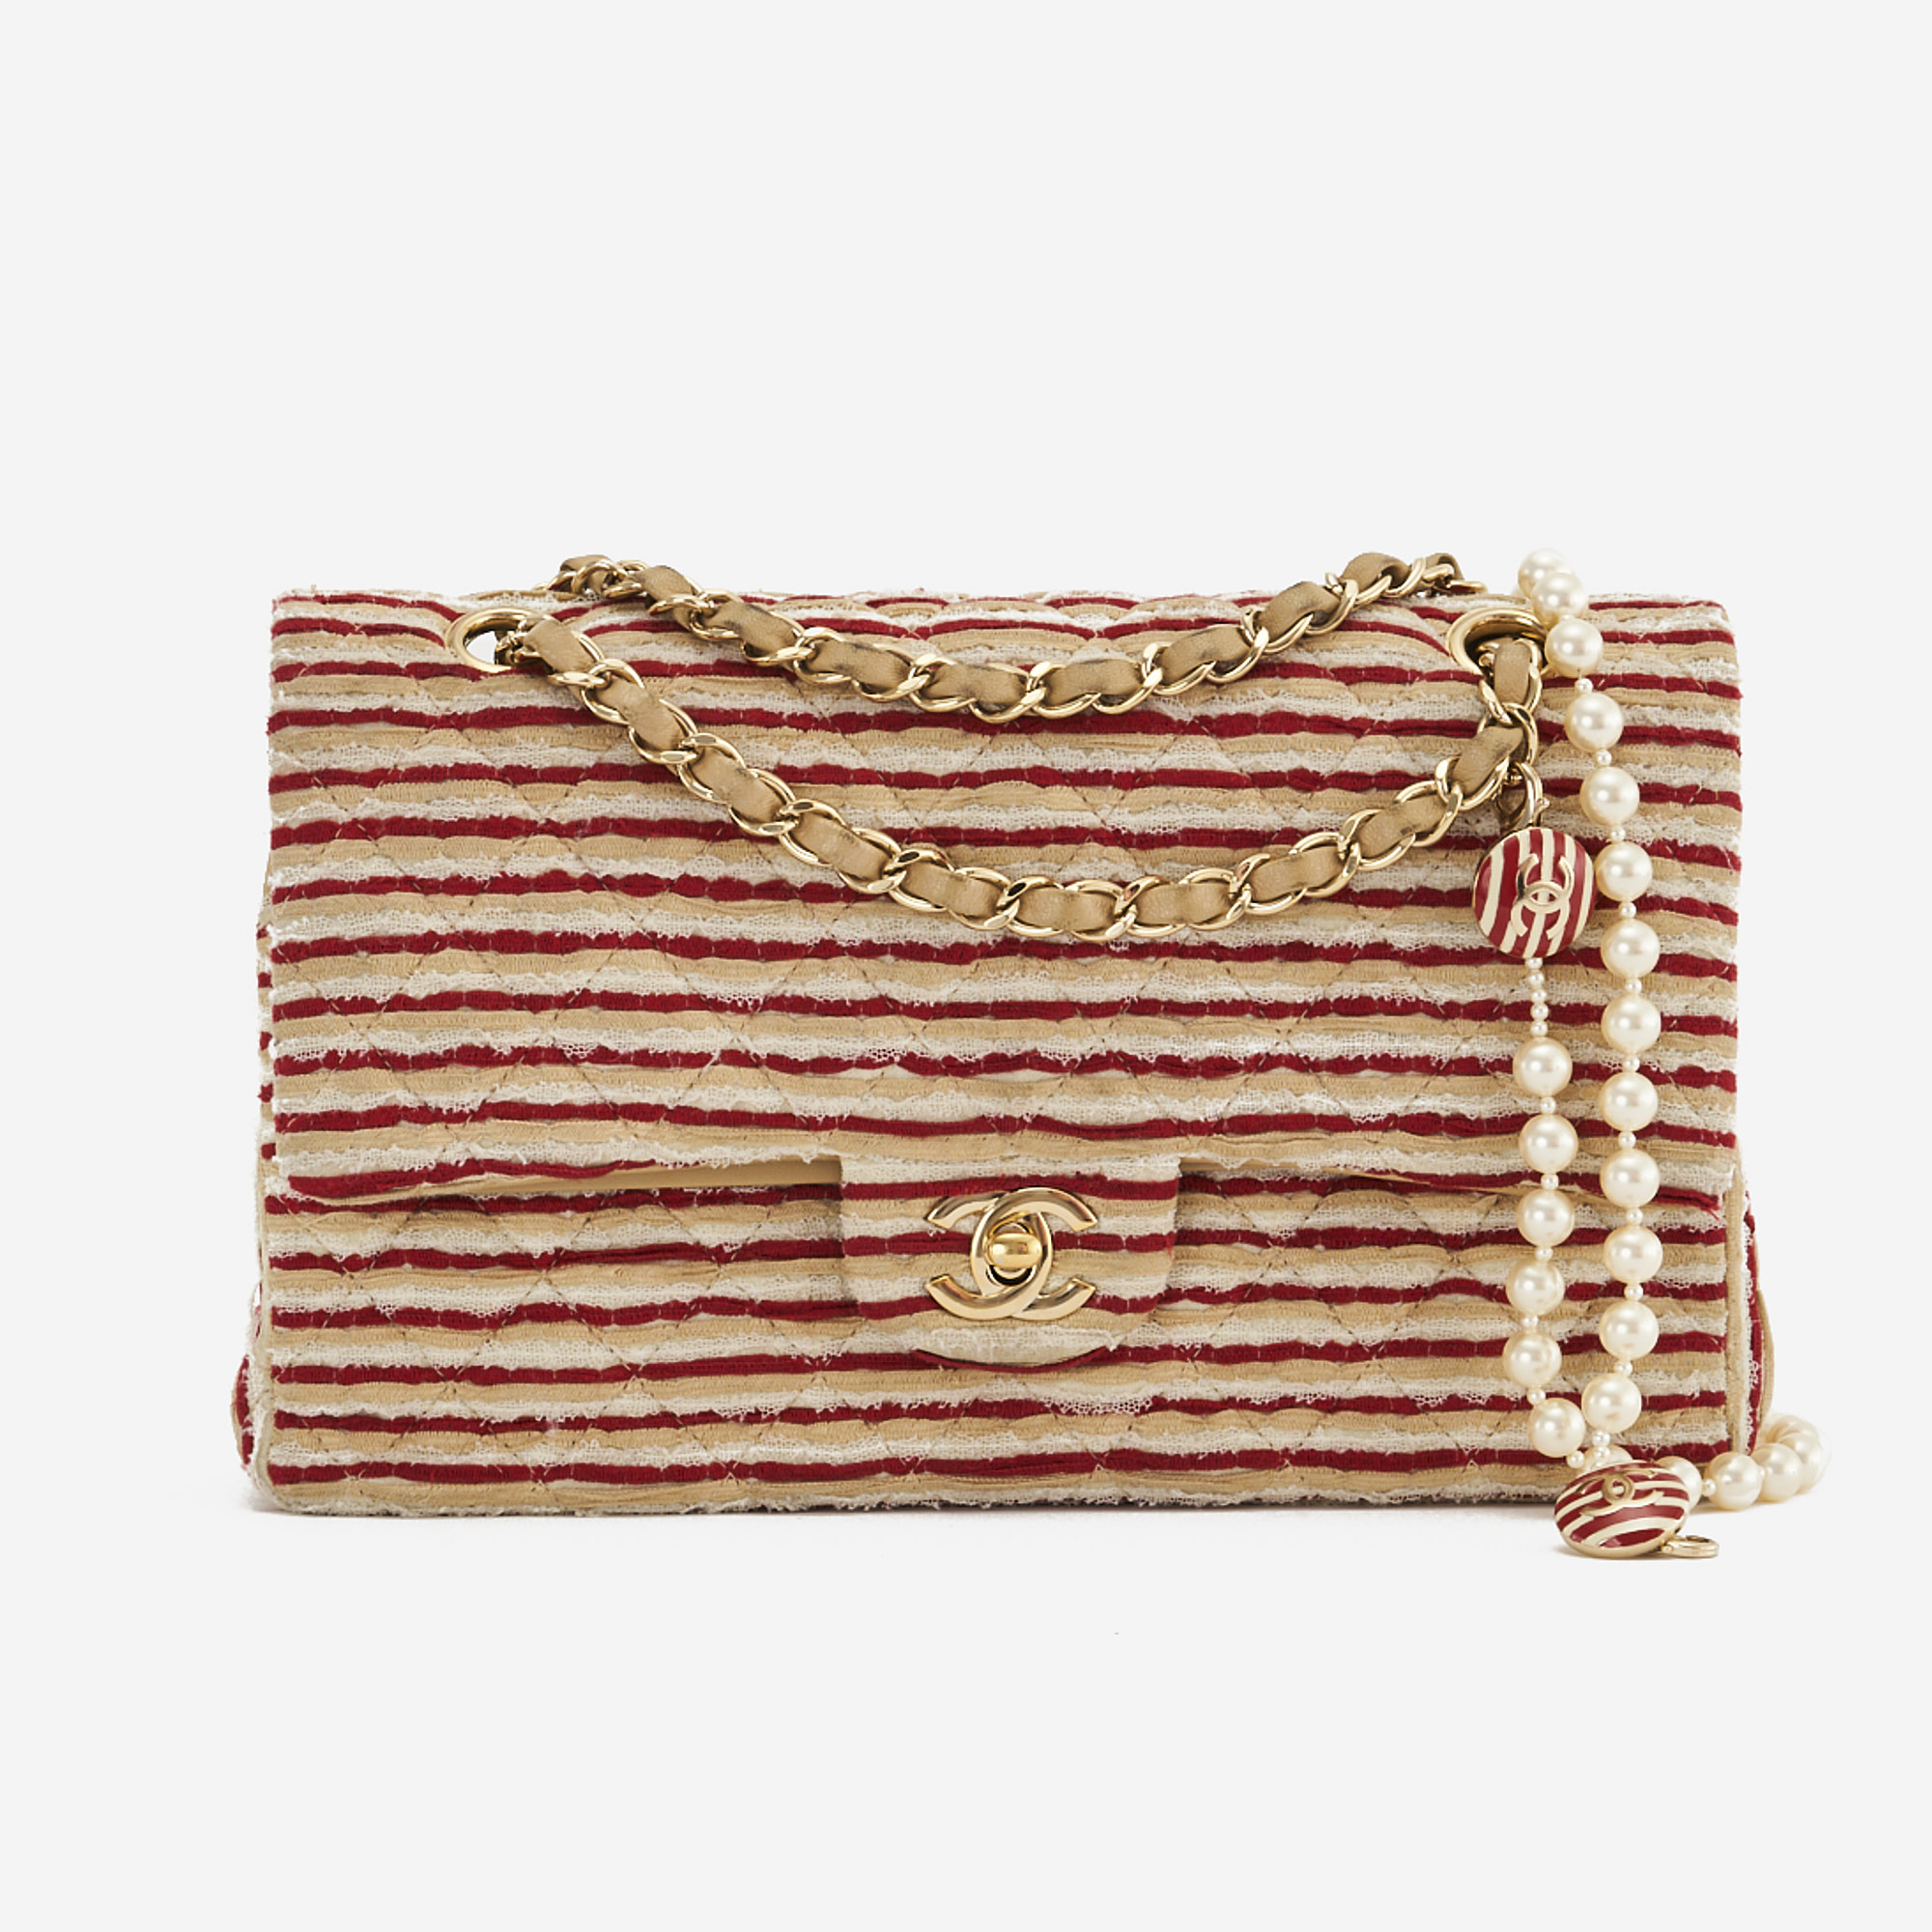 A limited-edition Chanel Timeless Medium made from Fabric and Pearls in Red and White on SACLÀB